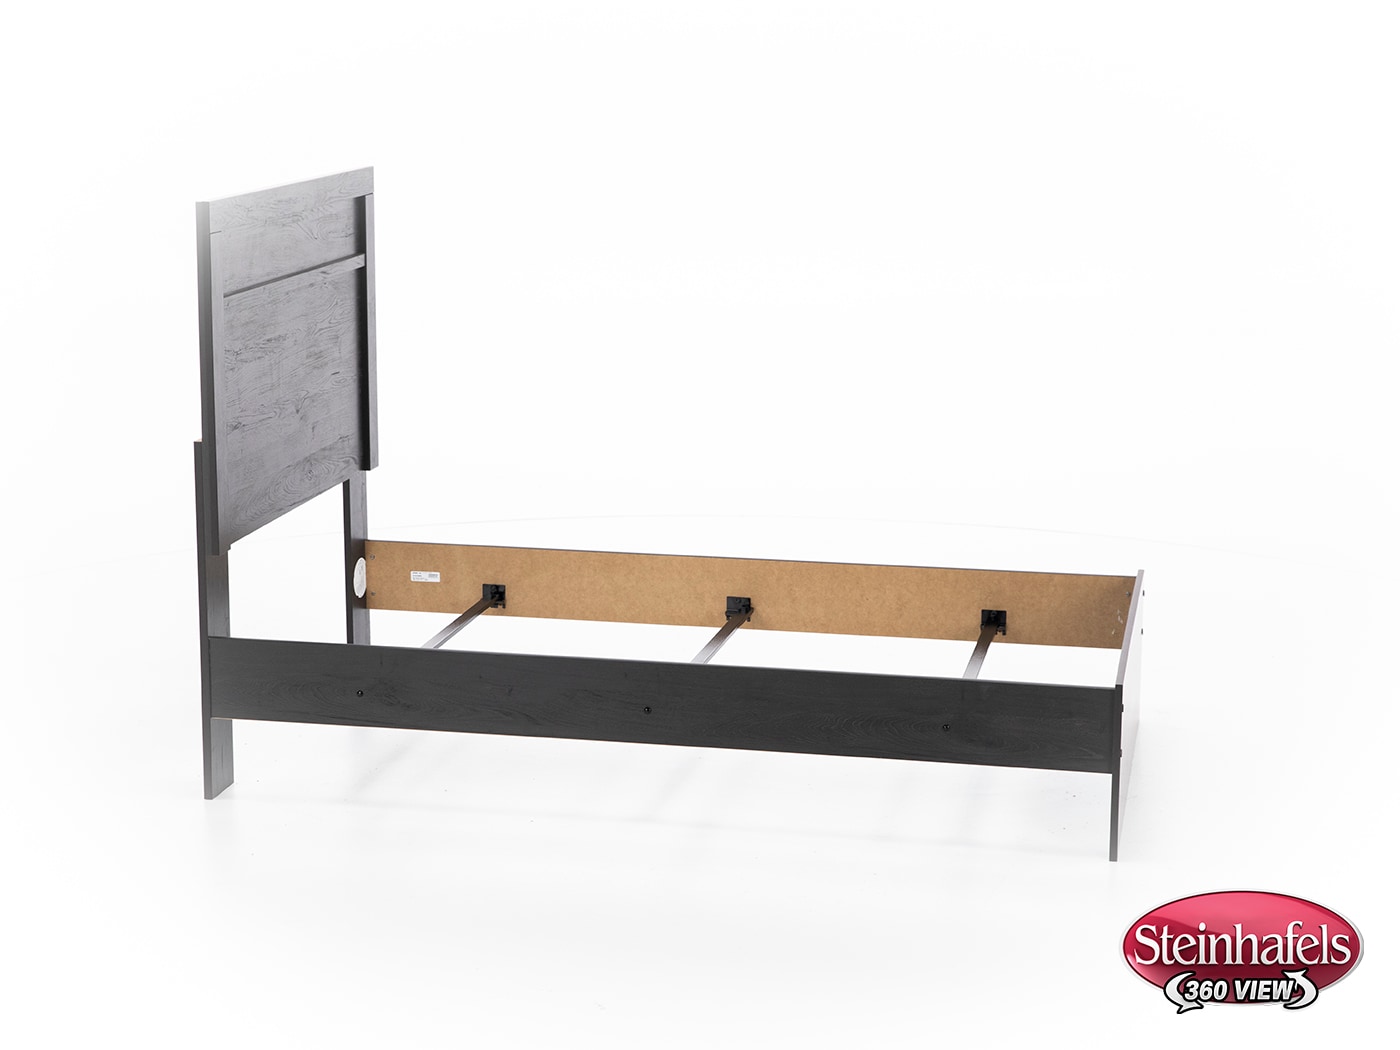 ashy grey twin bed package  image tpk  